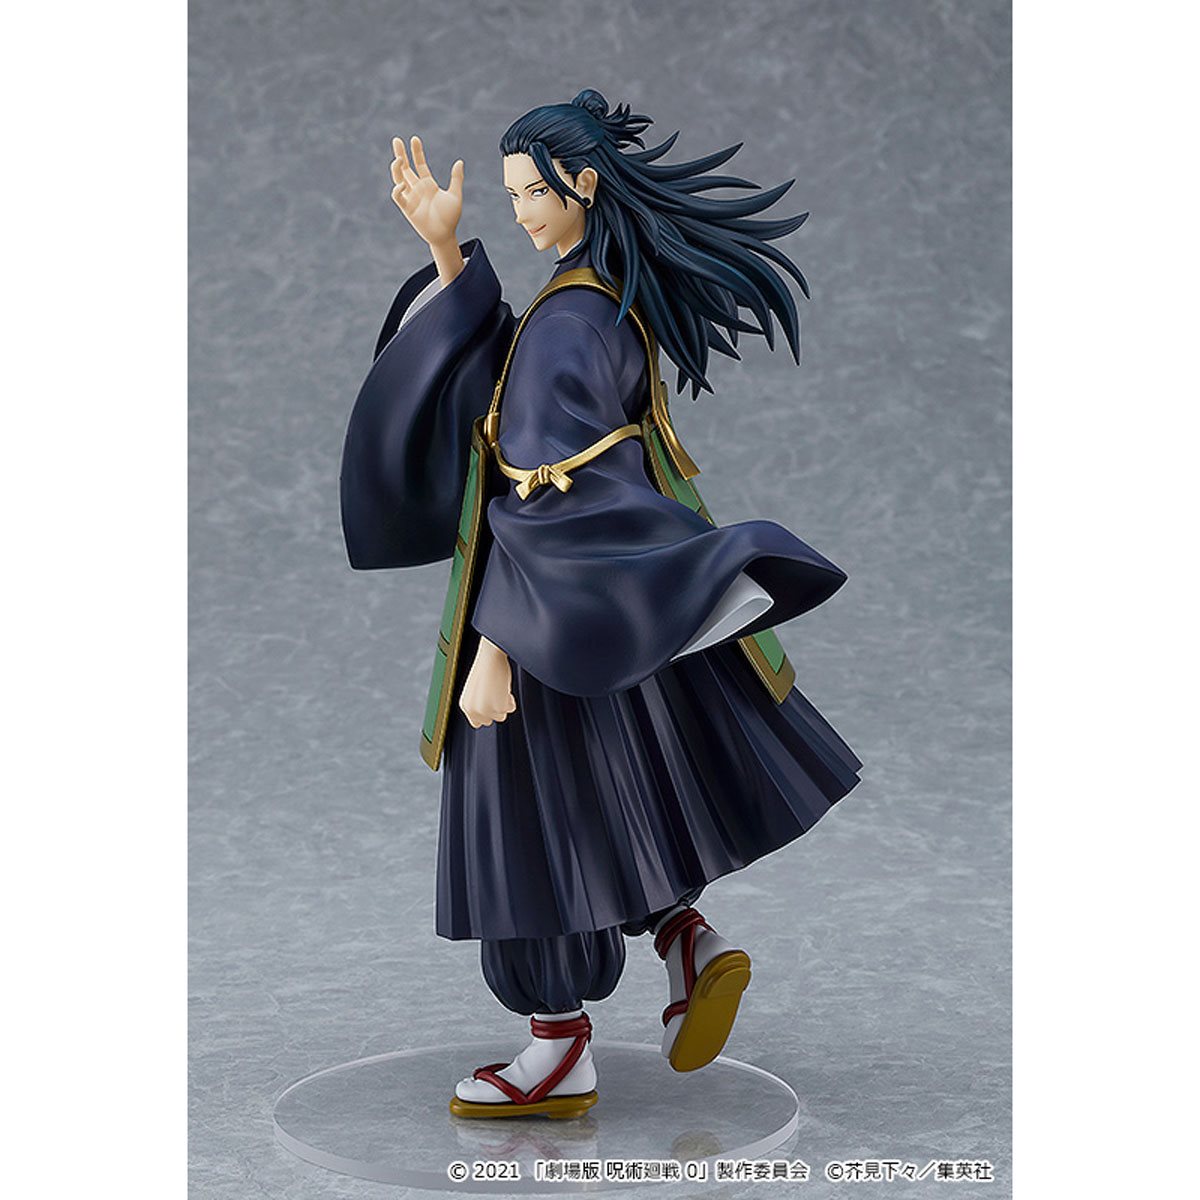 Buy iBaste Set Of 6 Demon Slayer Action Figures,Tanjiro Nezuko Kyoujurou Anime  Figures Toys,Fan Collections For Kids,Children,Christmas Online at Low  Prices in India - Amazon.in